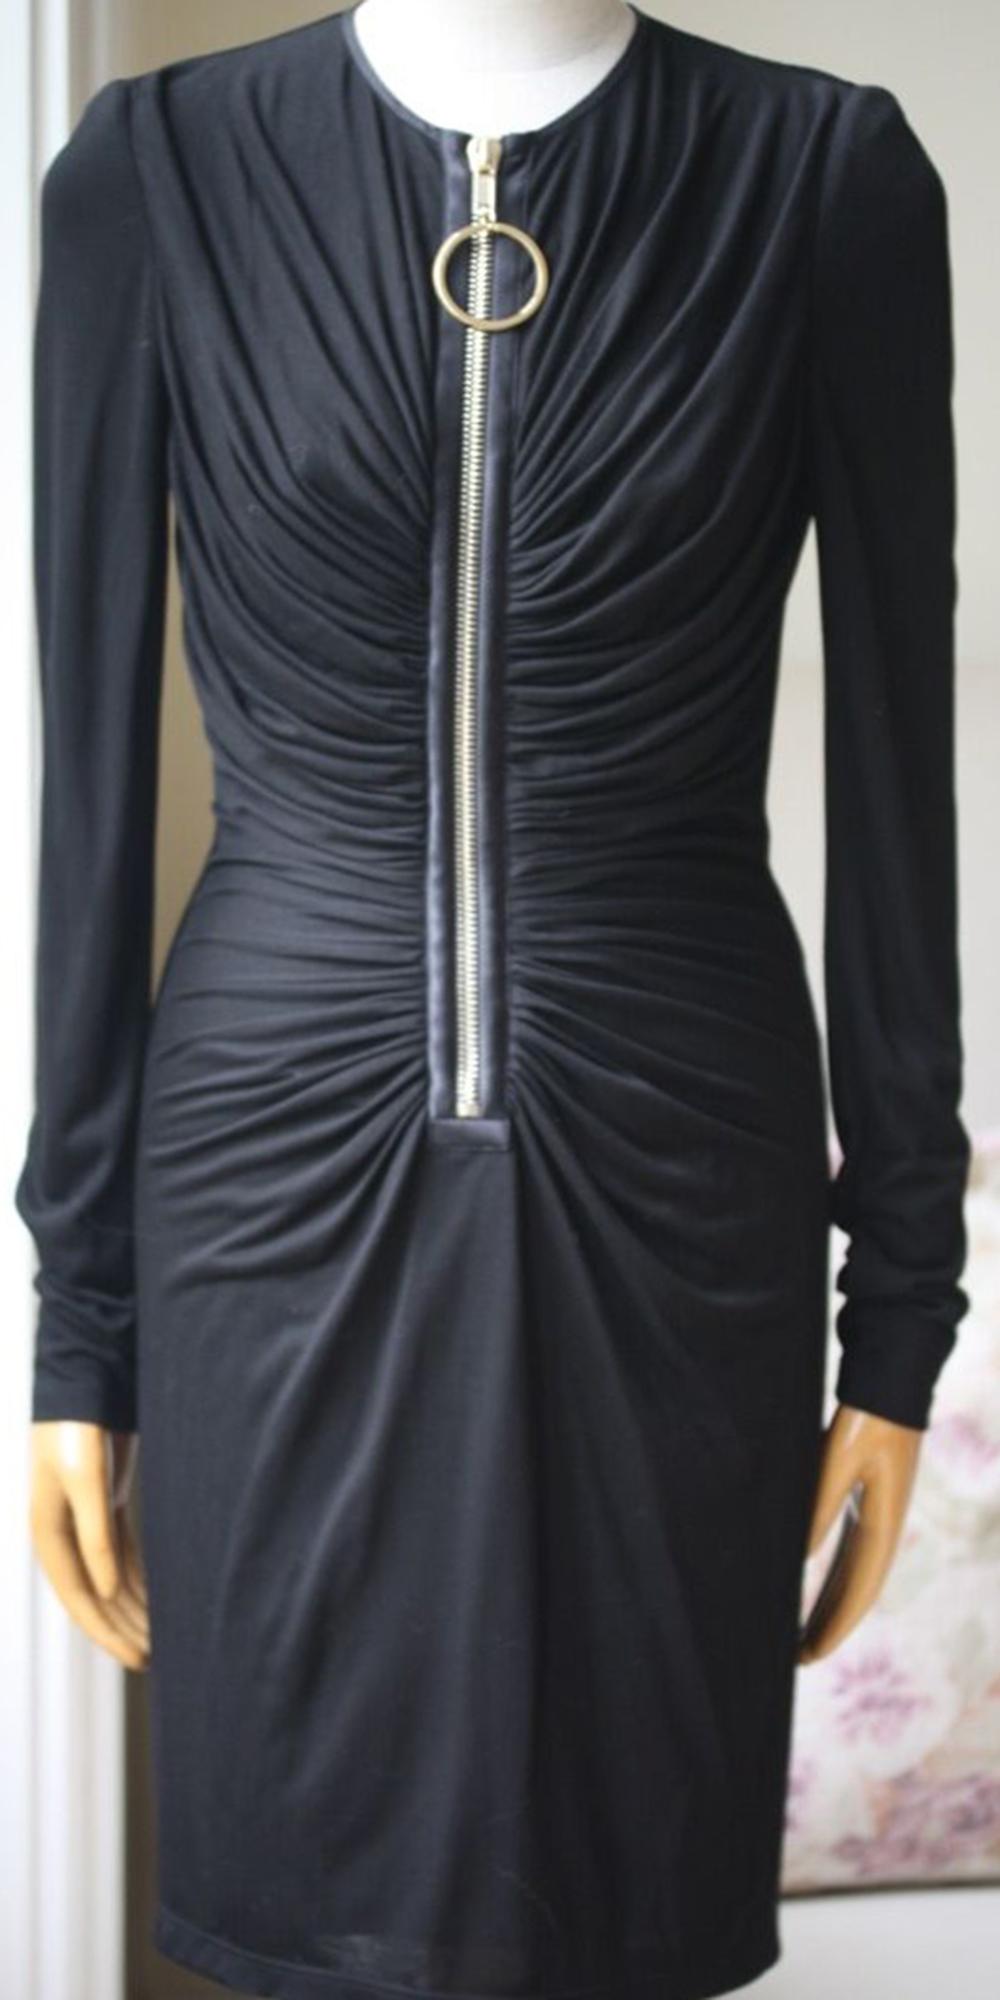 This black jersey dress is comfortable and lightweight, featuring elegant drape detailing around the bust and waist that flawlessly flatters the figure. Colour: black. 85% Viscose, 15% silk. Second fabric: 100% Silk. Lining: 80% polyamide, 20%